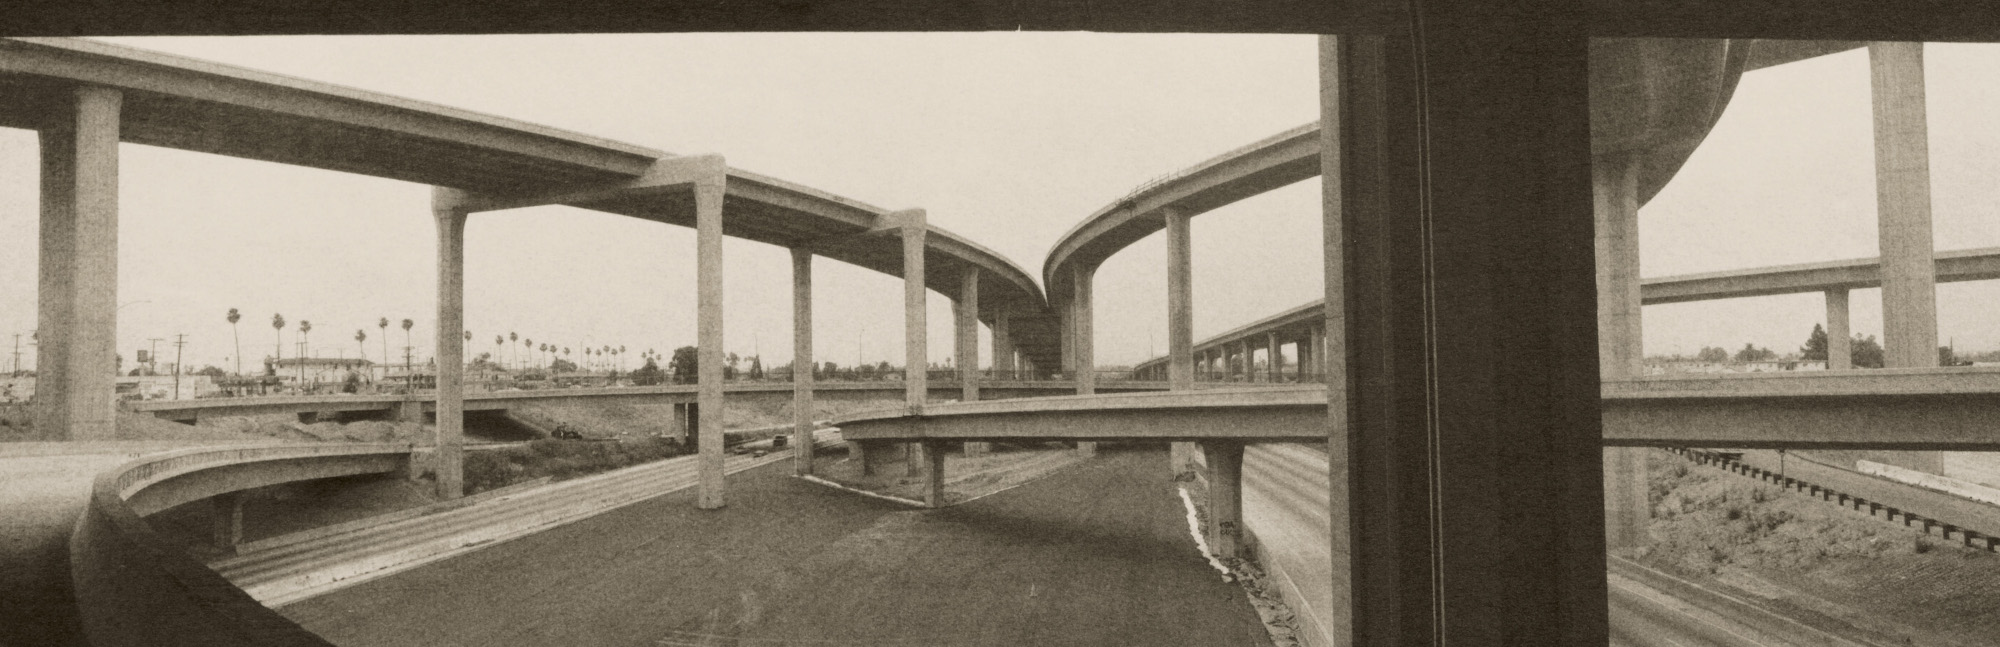 Untitled #3 (Freeways), 1994. Platinum print, 2 ¼ × 6 ¾ in. (5.7 × 17.1 cm). Picture credit: courtesy the artist and Regen Projects, Los Angeles; Lehmann Maupin, New York/Hong Kong/Seoul/London; Thomas Dane Gallery, London and Naples; and Peder Lund, Oslo